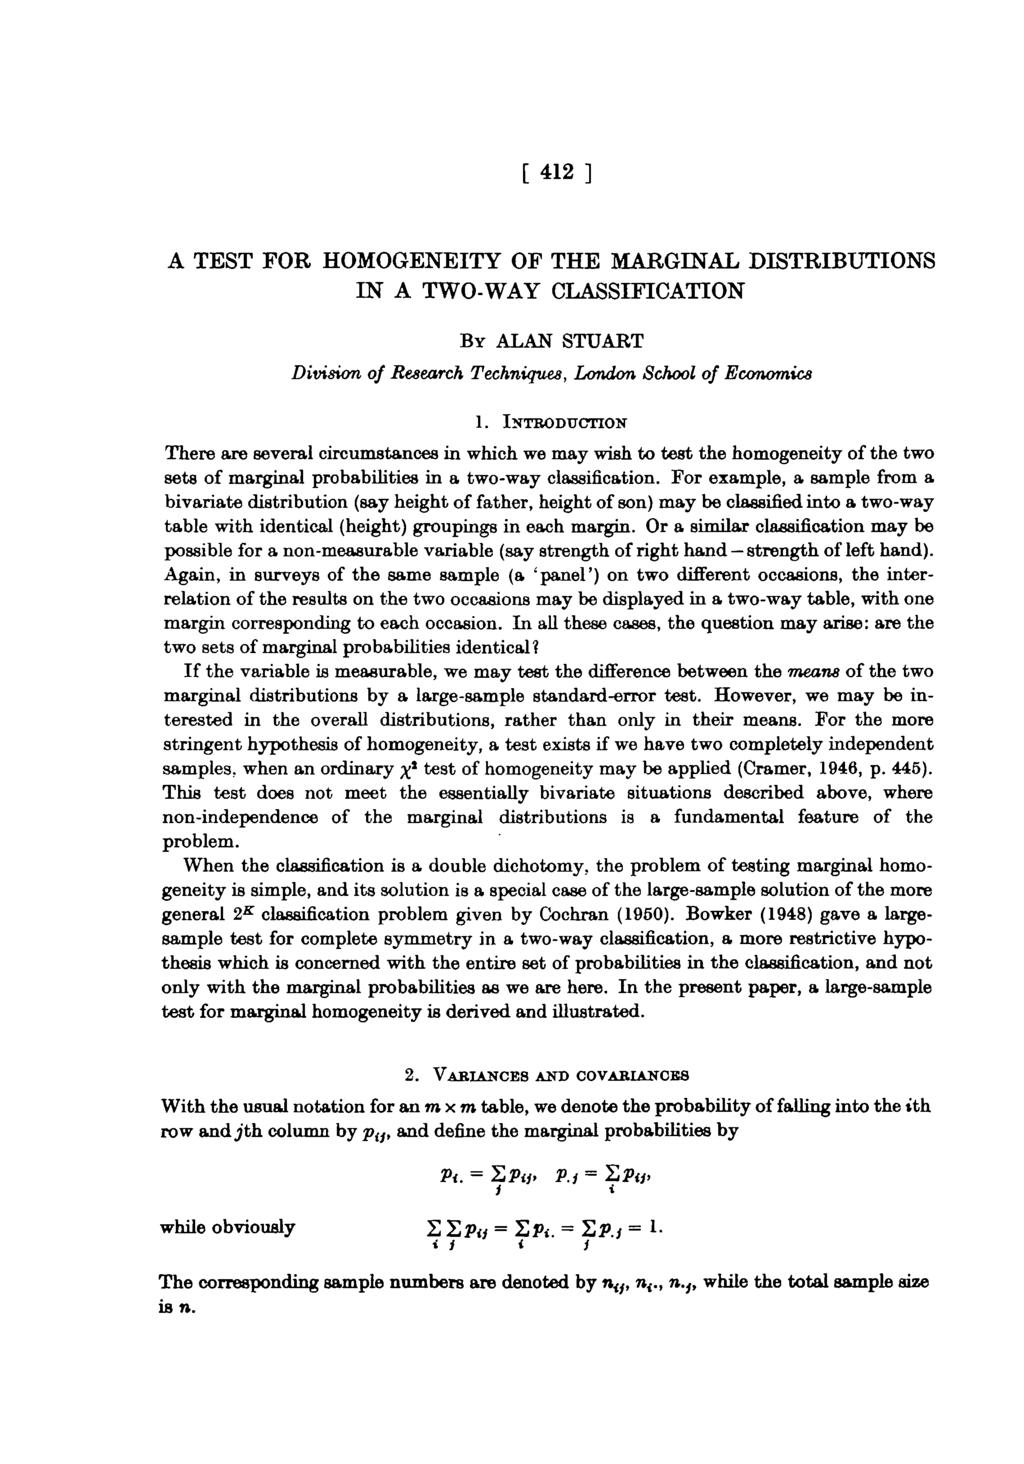 [412] A TEST FOR HOMOGENEITY OF THE MARGINAL DISTRIBUTIONS IN A TWO-WAY CLASSIFICATION BY ALAN STUART Divisio of Research Techiques, Lodo School of Ecoomics 1.